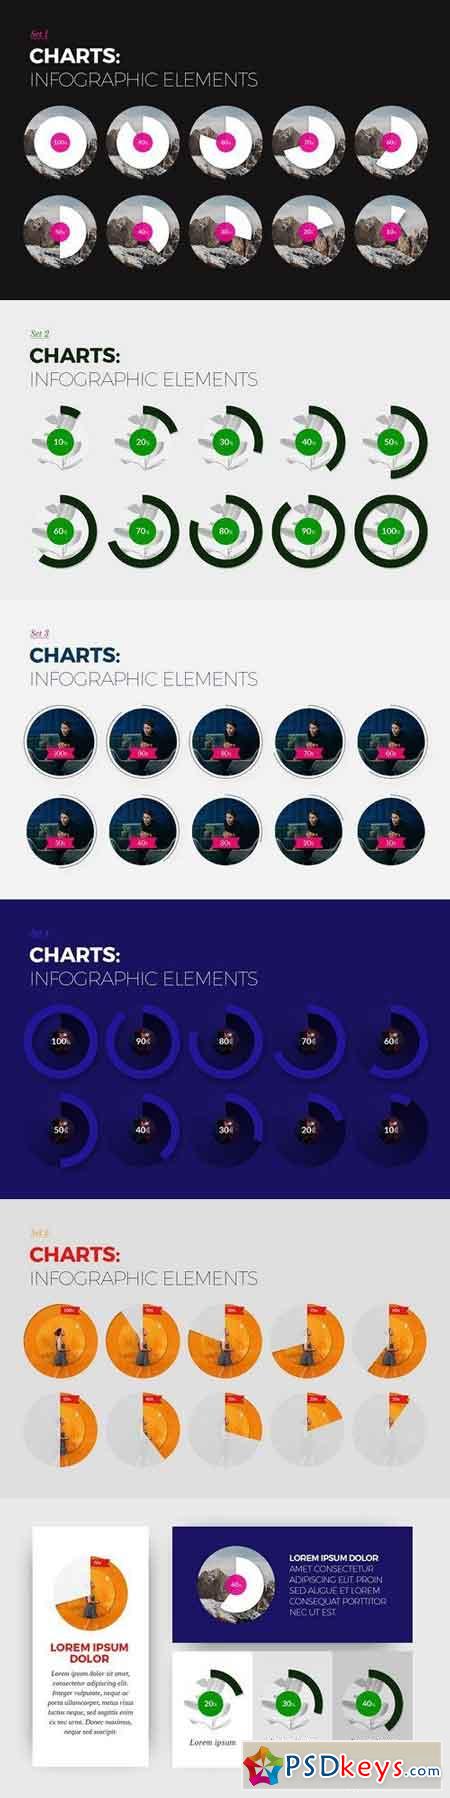 Charts sets - Infographic elements 1965876